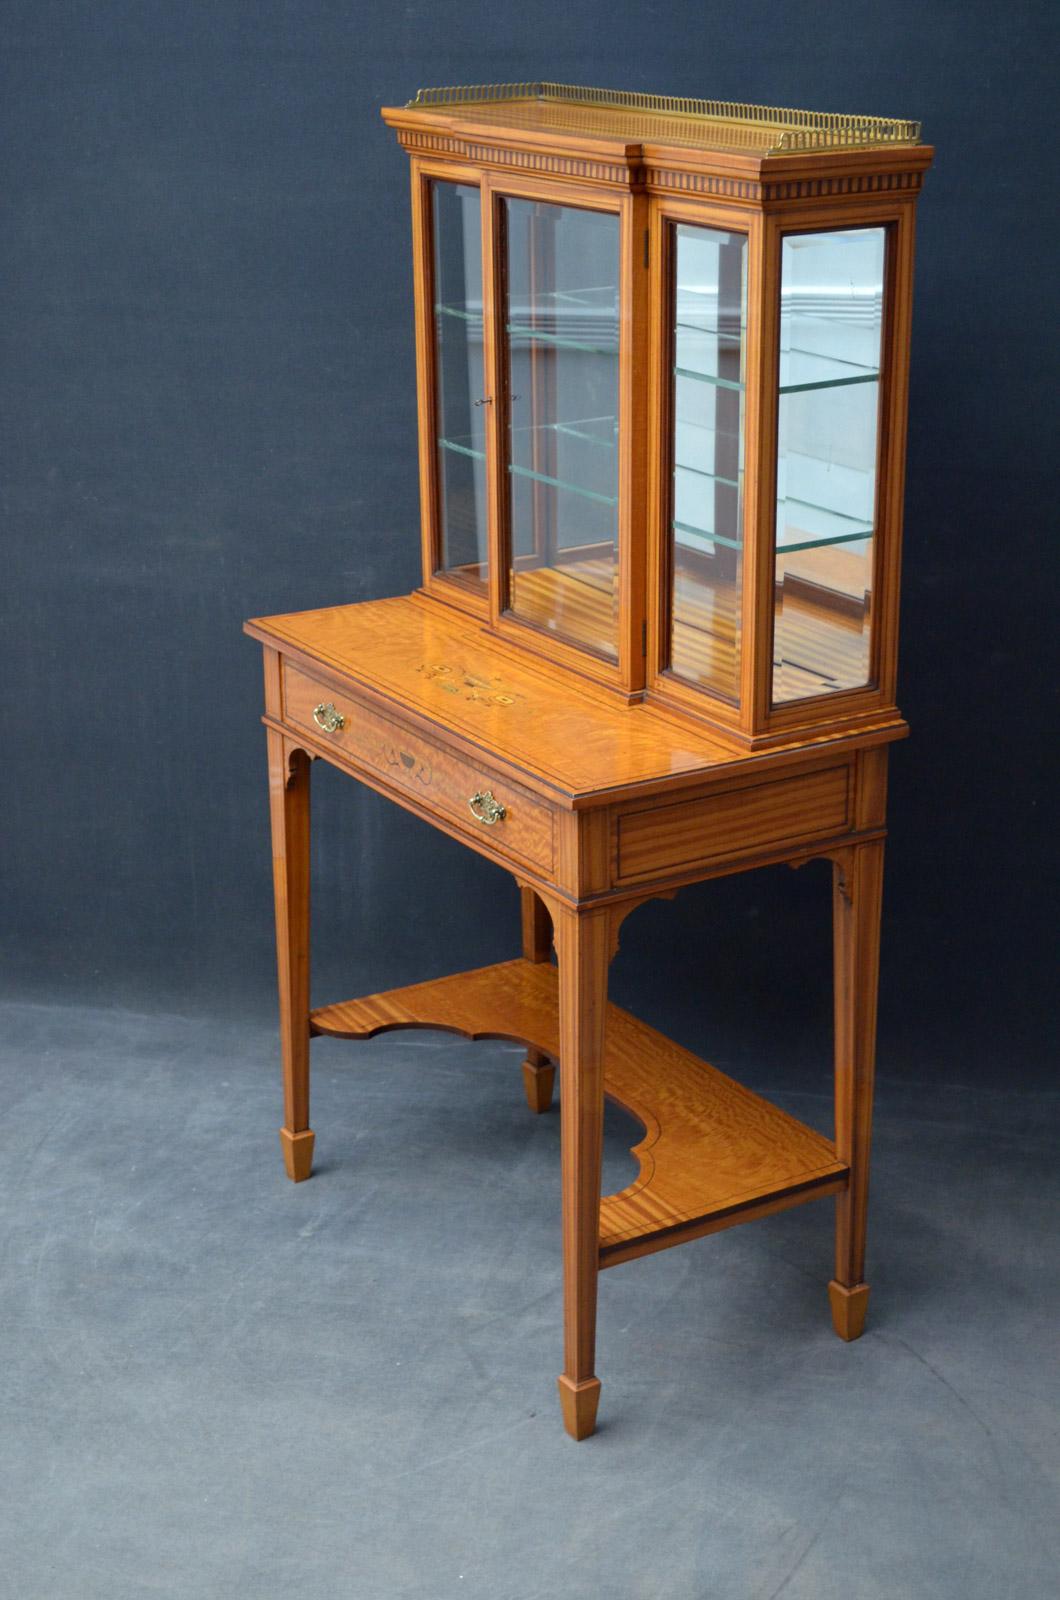 Sn4640, superb quality Edwardian satinwood display cabinet /display table, having original bass gallery to string inlaid top above dentil inlaid frieze and bevelled edge glass door fitted with original working lock and a key and enclosing mirrored